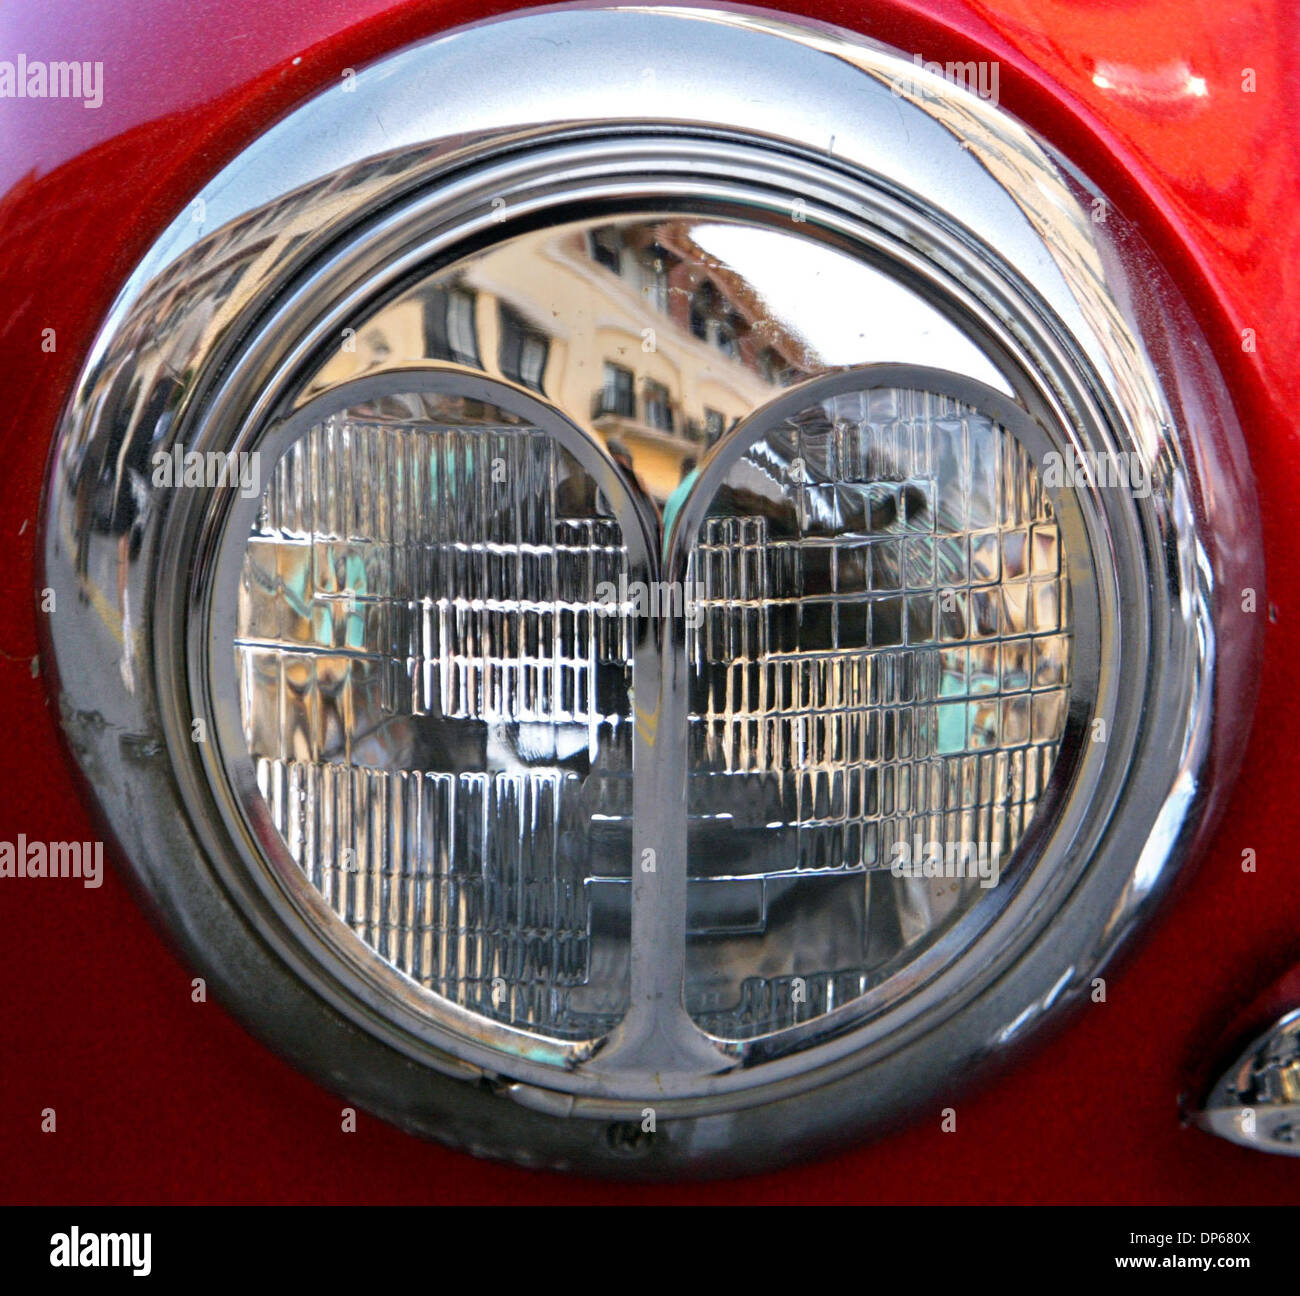 Oct 08, 2006; West Palm Beach, FL, USA; The headlight of Stephen Durland's 1949 Plymouth hot rod on display at the 'Blast From the Past' Classic Car Show on Rosemary Avenue in CityPlace  Sunday .  The 2-day event featured a display of about 50  collectable cars, both classic and exotic, ranging from a 1923 Ford Model T to several 2006 vehicles.    Mandatory Credit: Photo by Lannis  Stock Photo